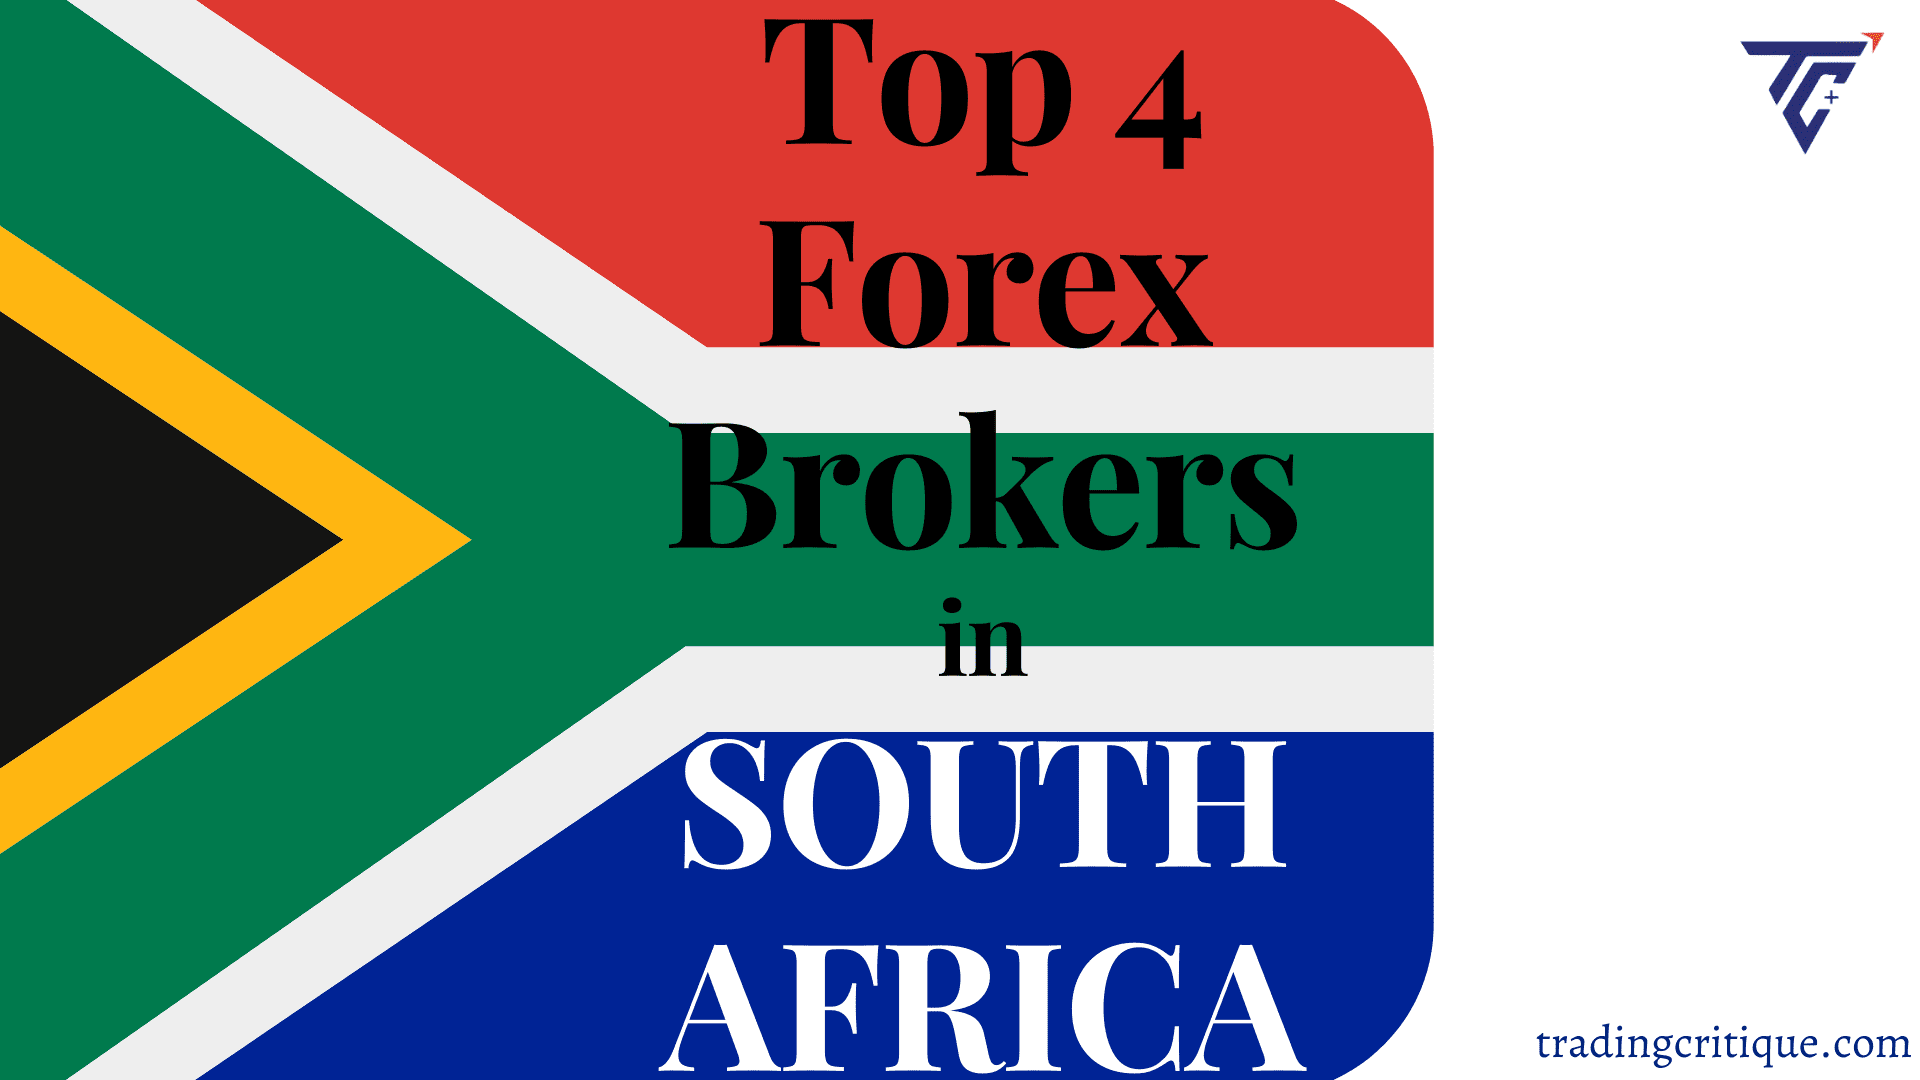 Top 4 Forex Brokers in South Africa 2022 - Trading Critique